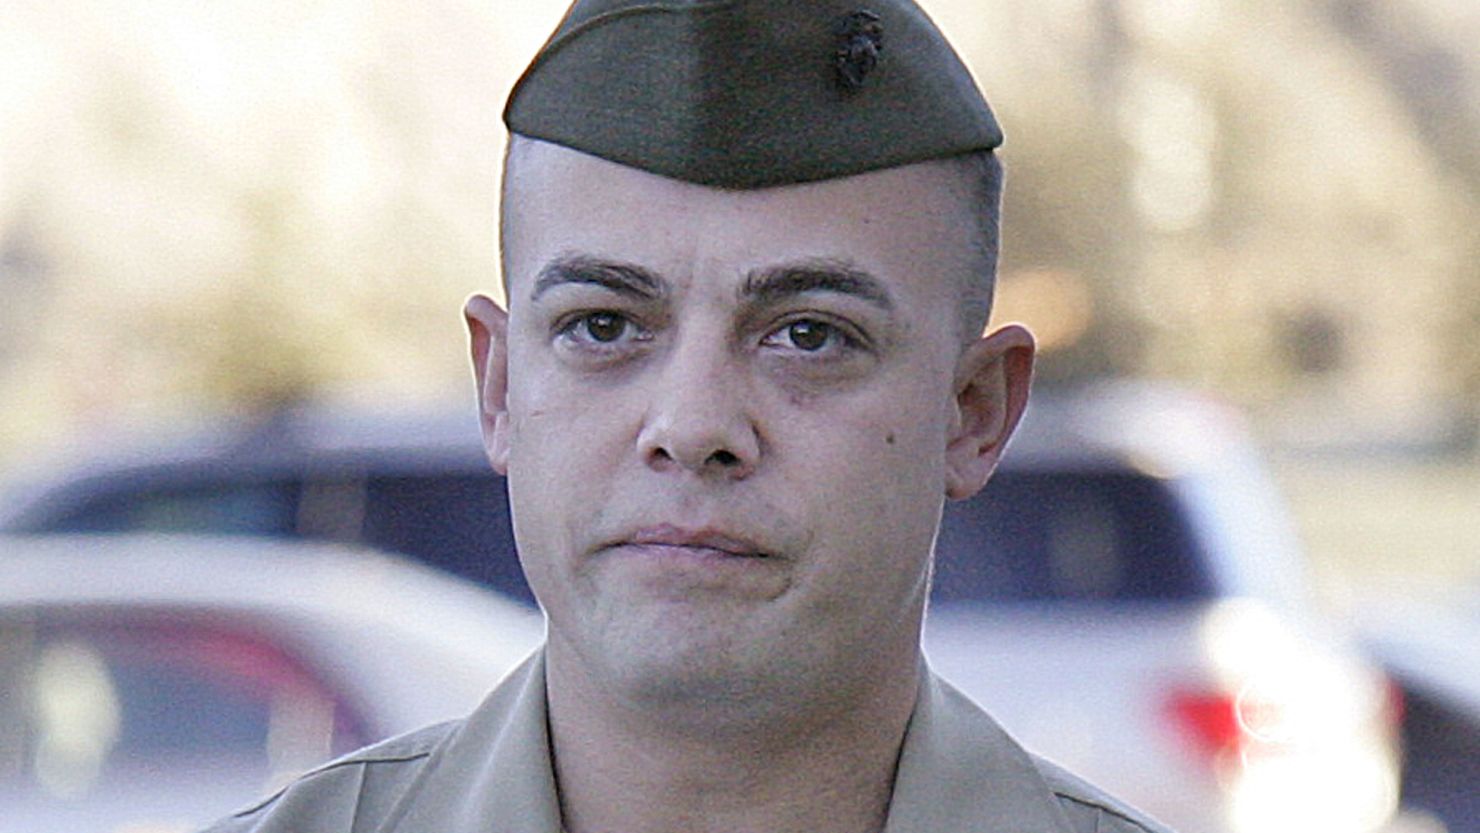 Staff Sgt. Frank Wuterich  is  charged in the deaths of 24 Iraqis during a military operation in 2005.